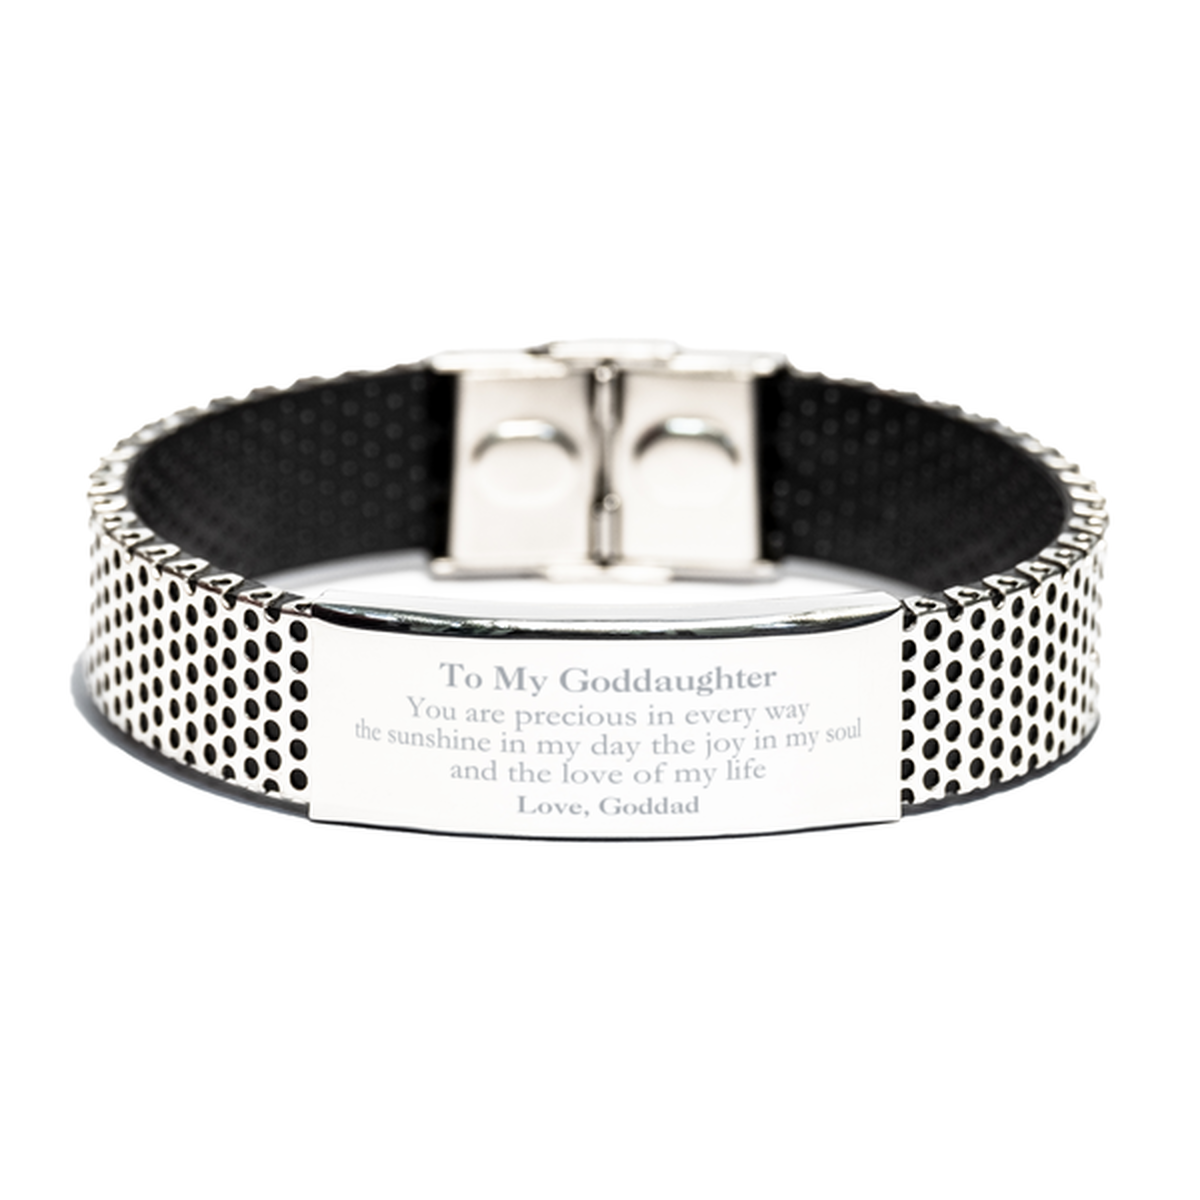 Graduation Gifts for Goddaughter Stainless Steel Bracelet Present from Goddad, Christmas Goddaughter Birthday Gifts Goddaughter You are precious in every way the sunshine in my day. Love, Goddad